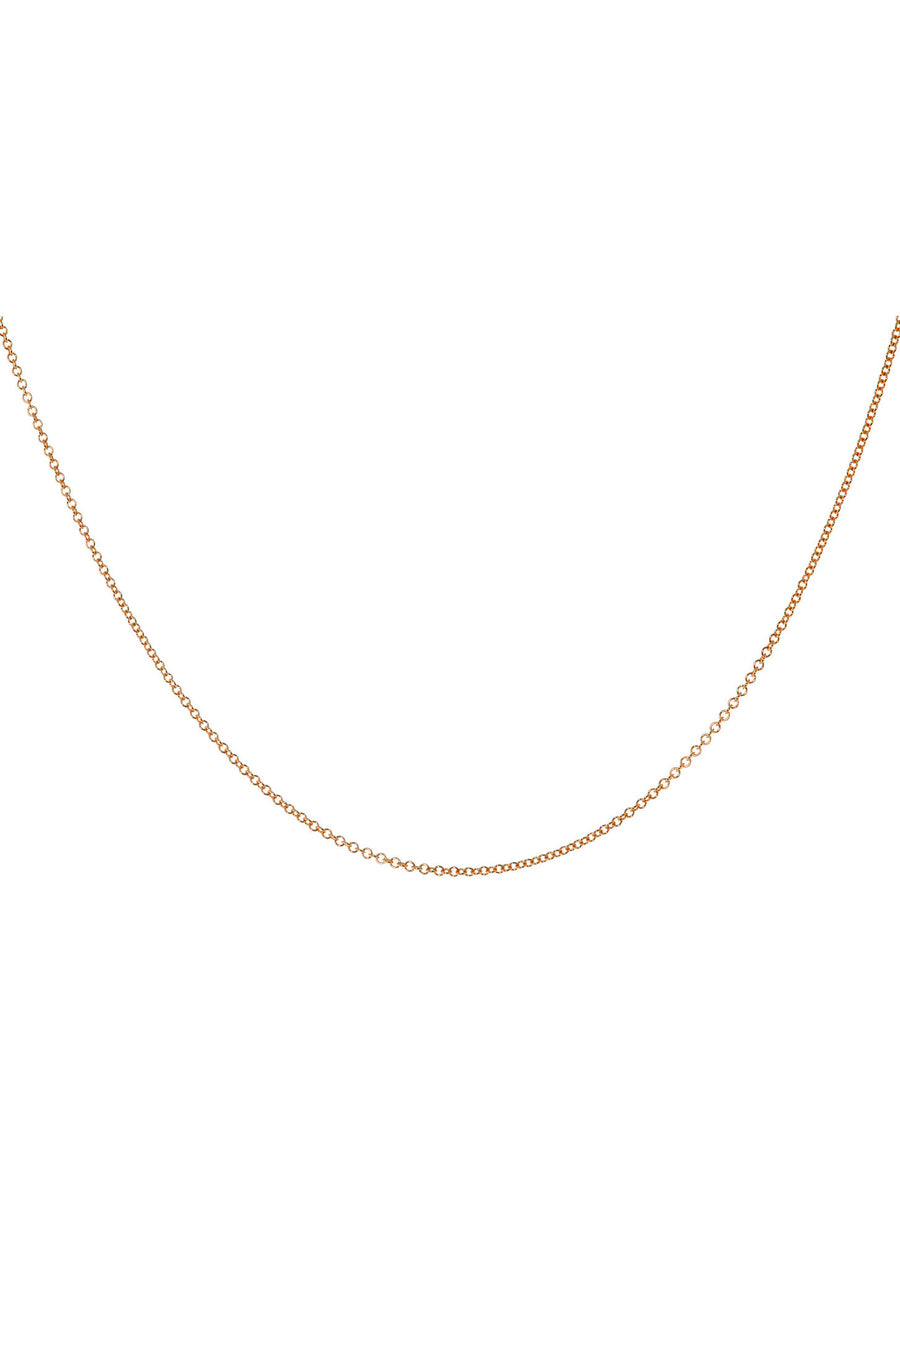 1.3mm Cable Chain Necklace in 14k Gold  | 18"